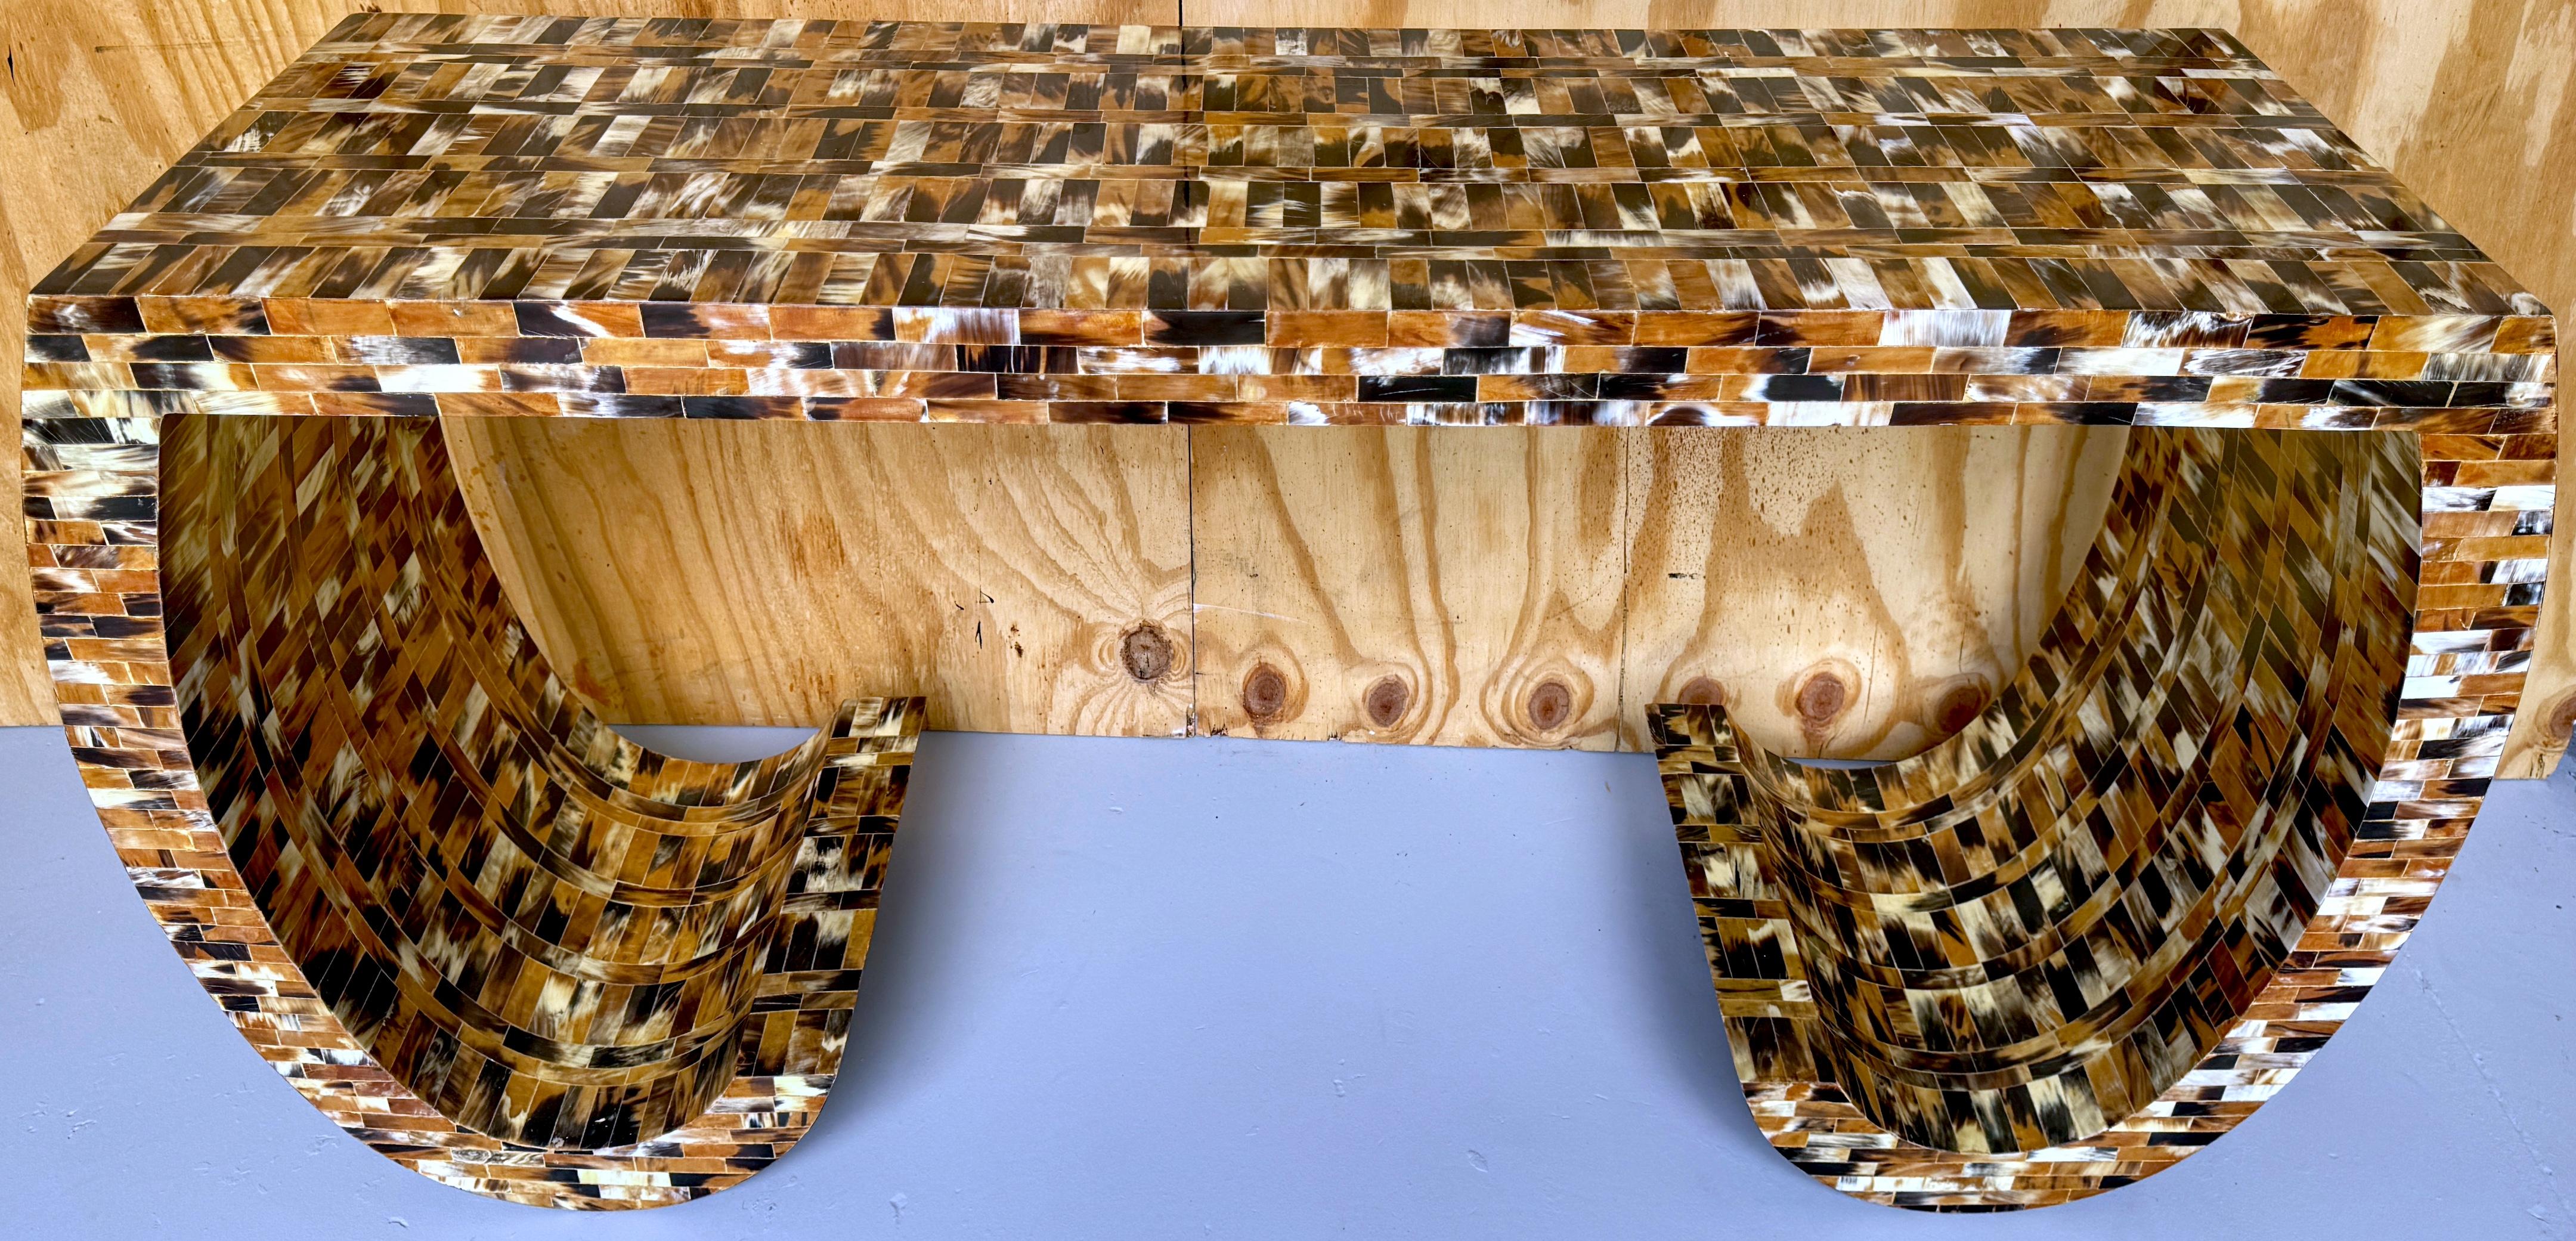 Tessellated Cow Horn Scroll Leg Console Table by Enrique Garcel, circa 1980s
Colombia, circa 1980s

Elevate your living space with the exquisite Tessellated Cow Horn Scroll Leg Console Table by renowned Colombian designer Enrique Garcel, circa 1980s